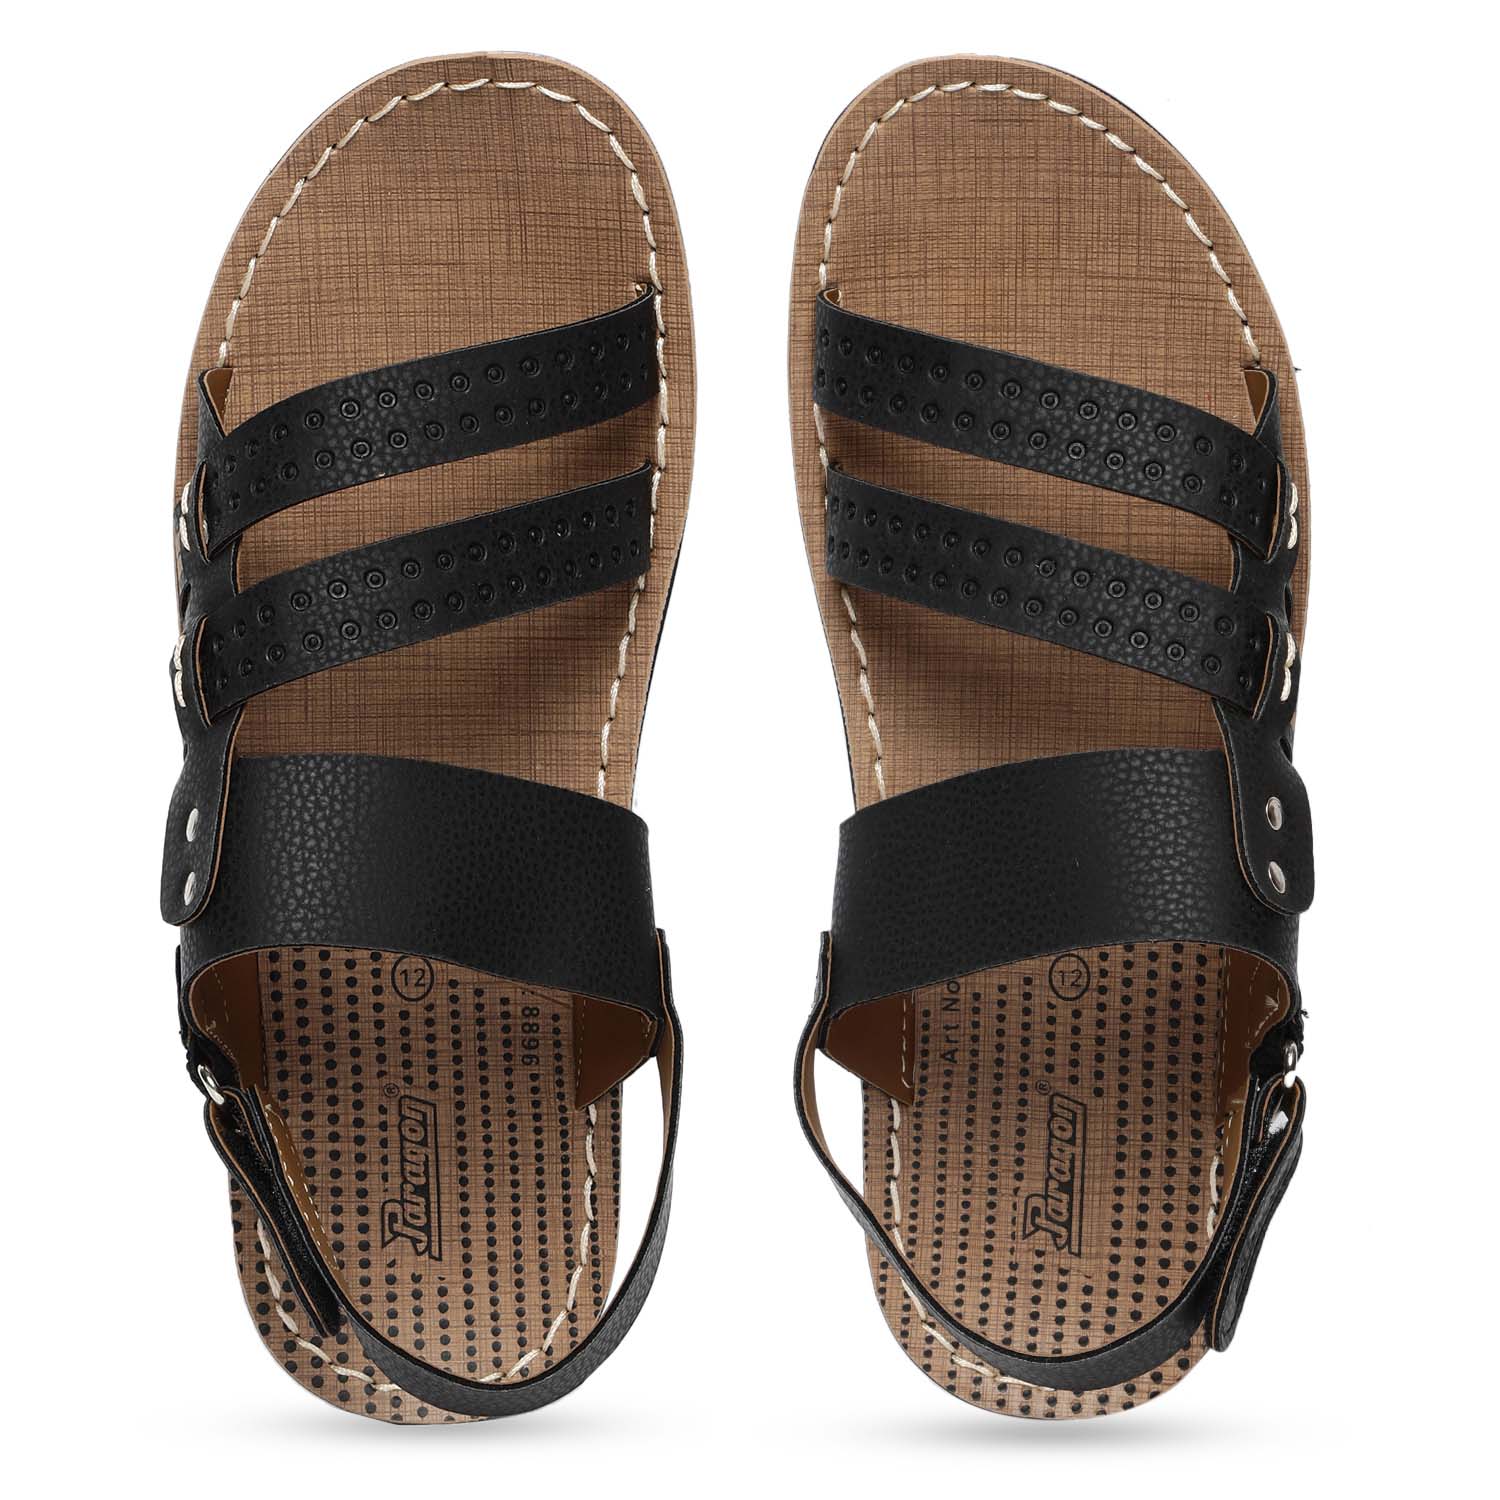 Paragon PU8896T Men Stylish Sandals | Comfortable Sandals for Daily Outdoor Use | Casual Formal Sandals with Cushioned Soles